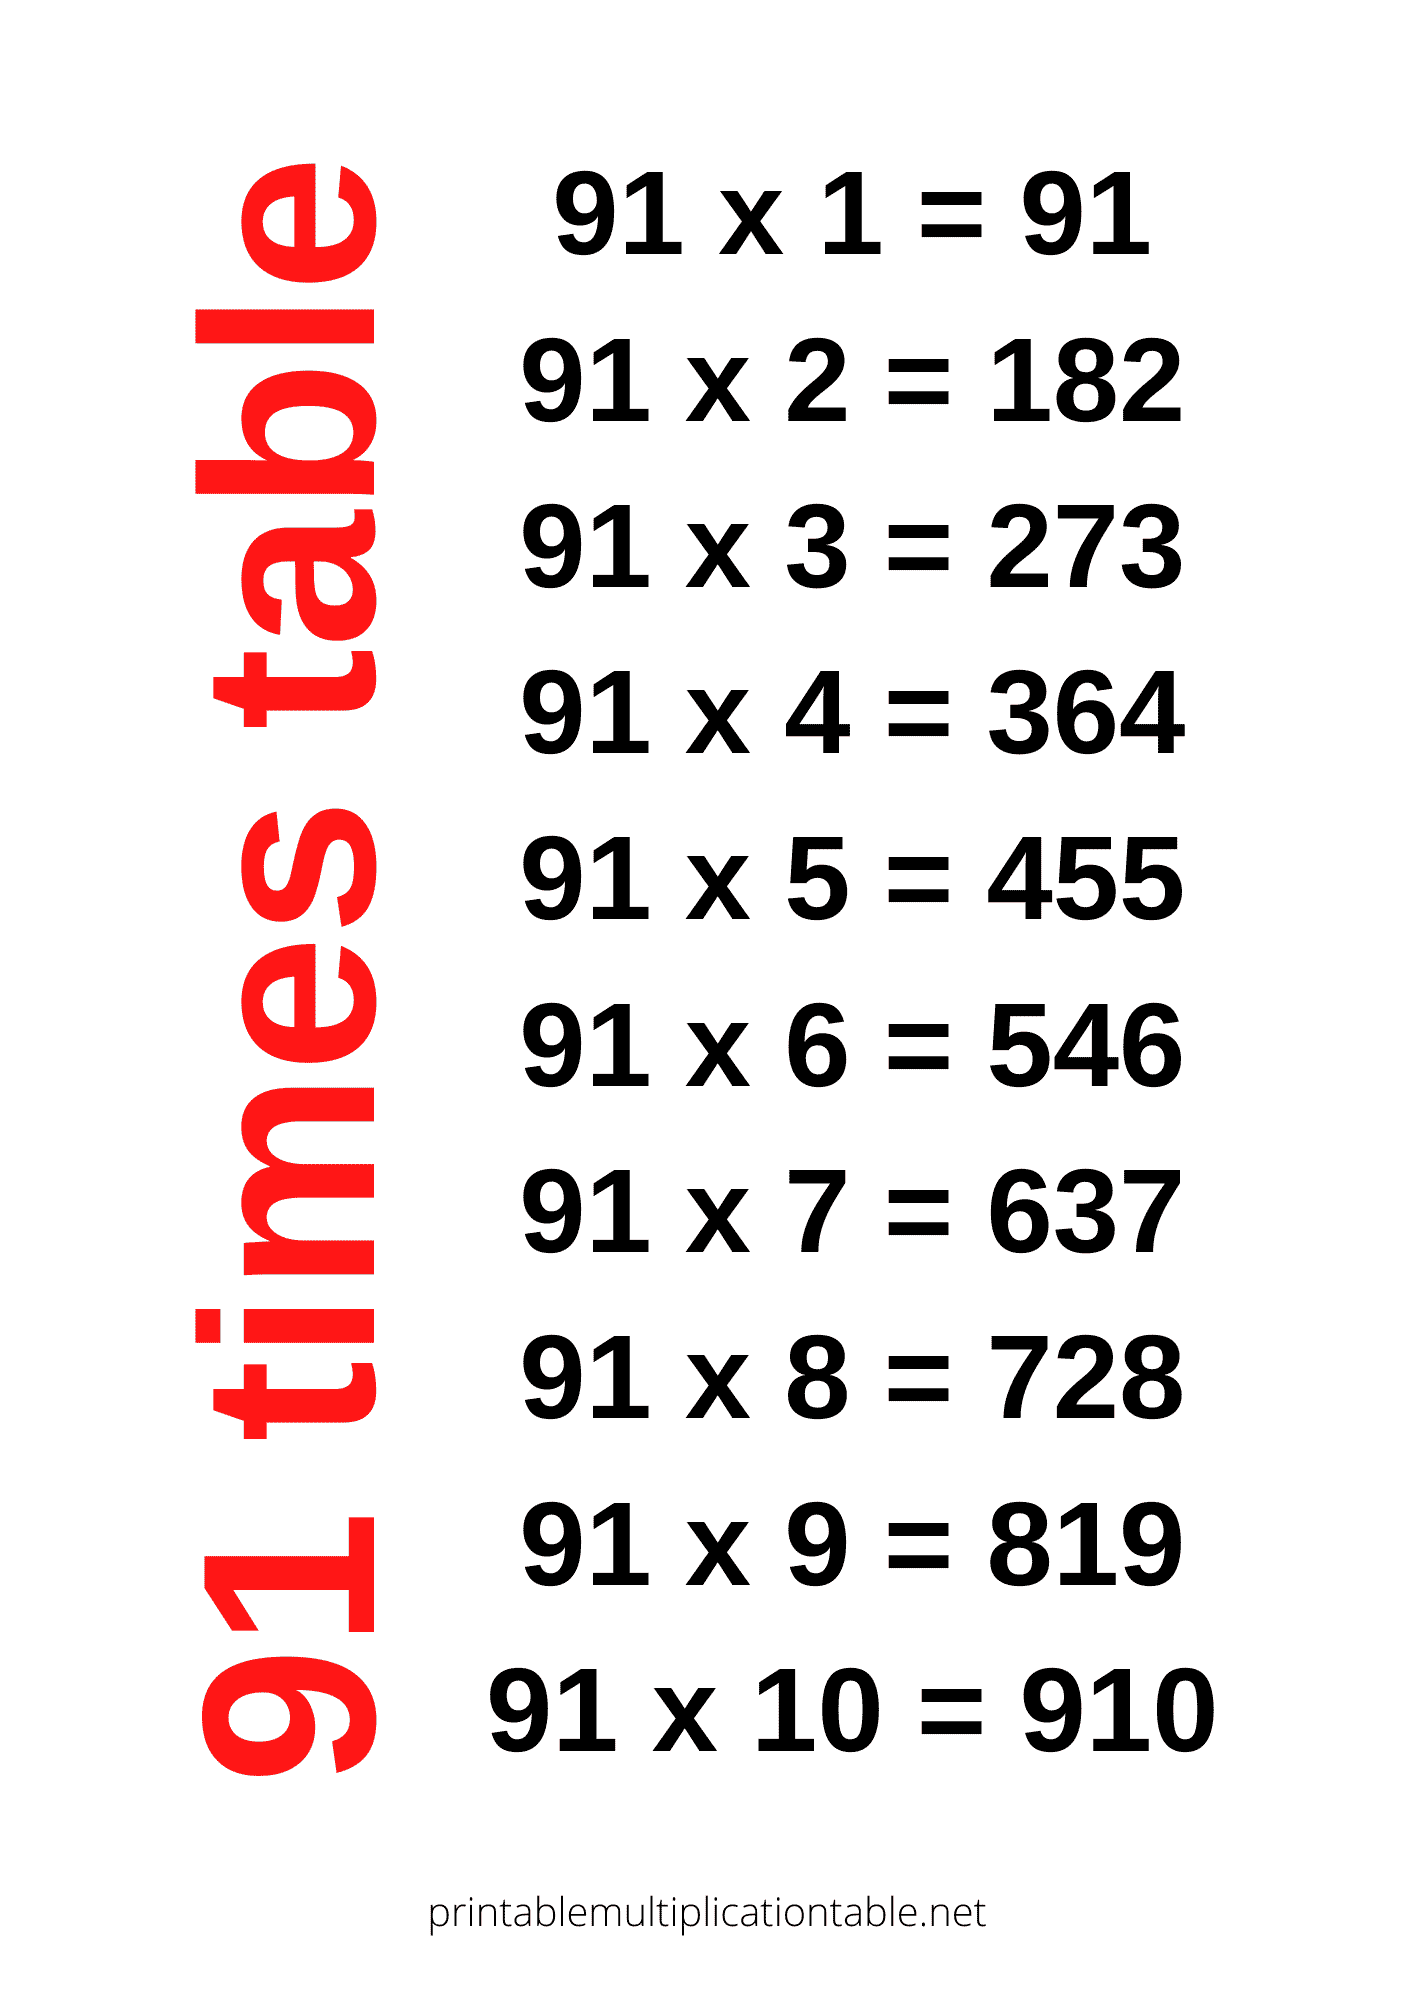 91 times table chart